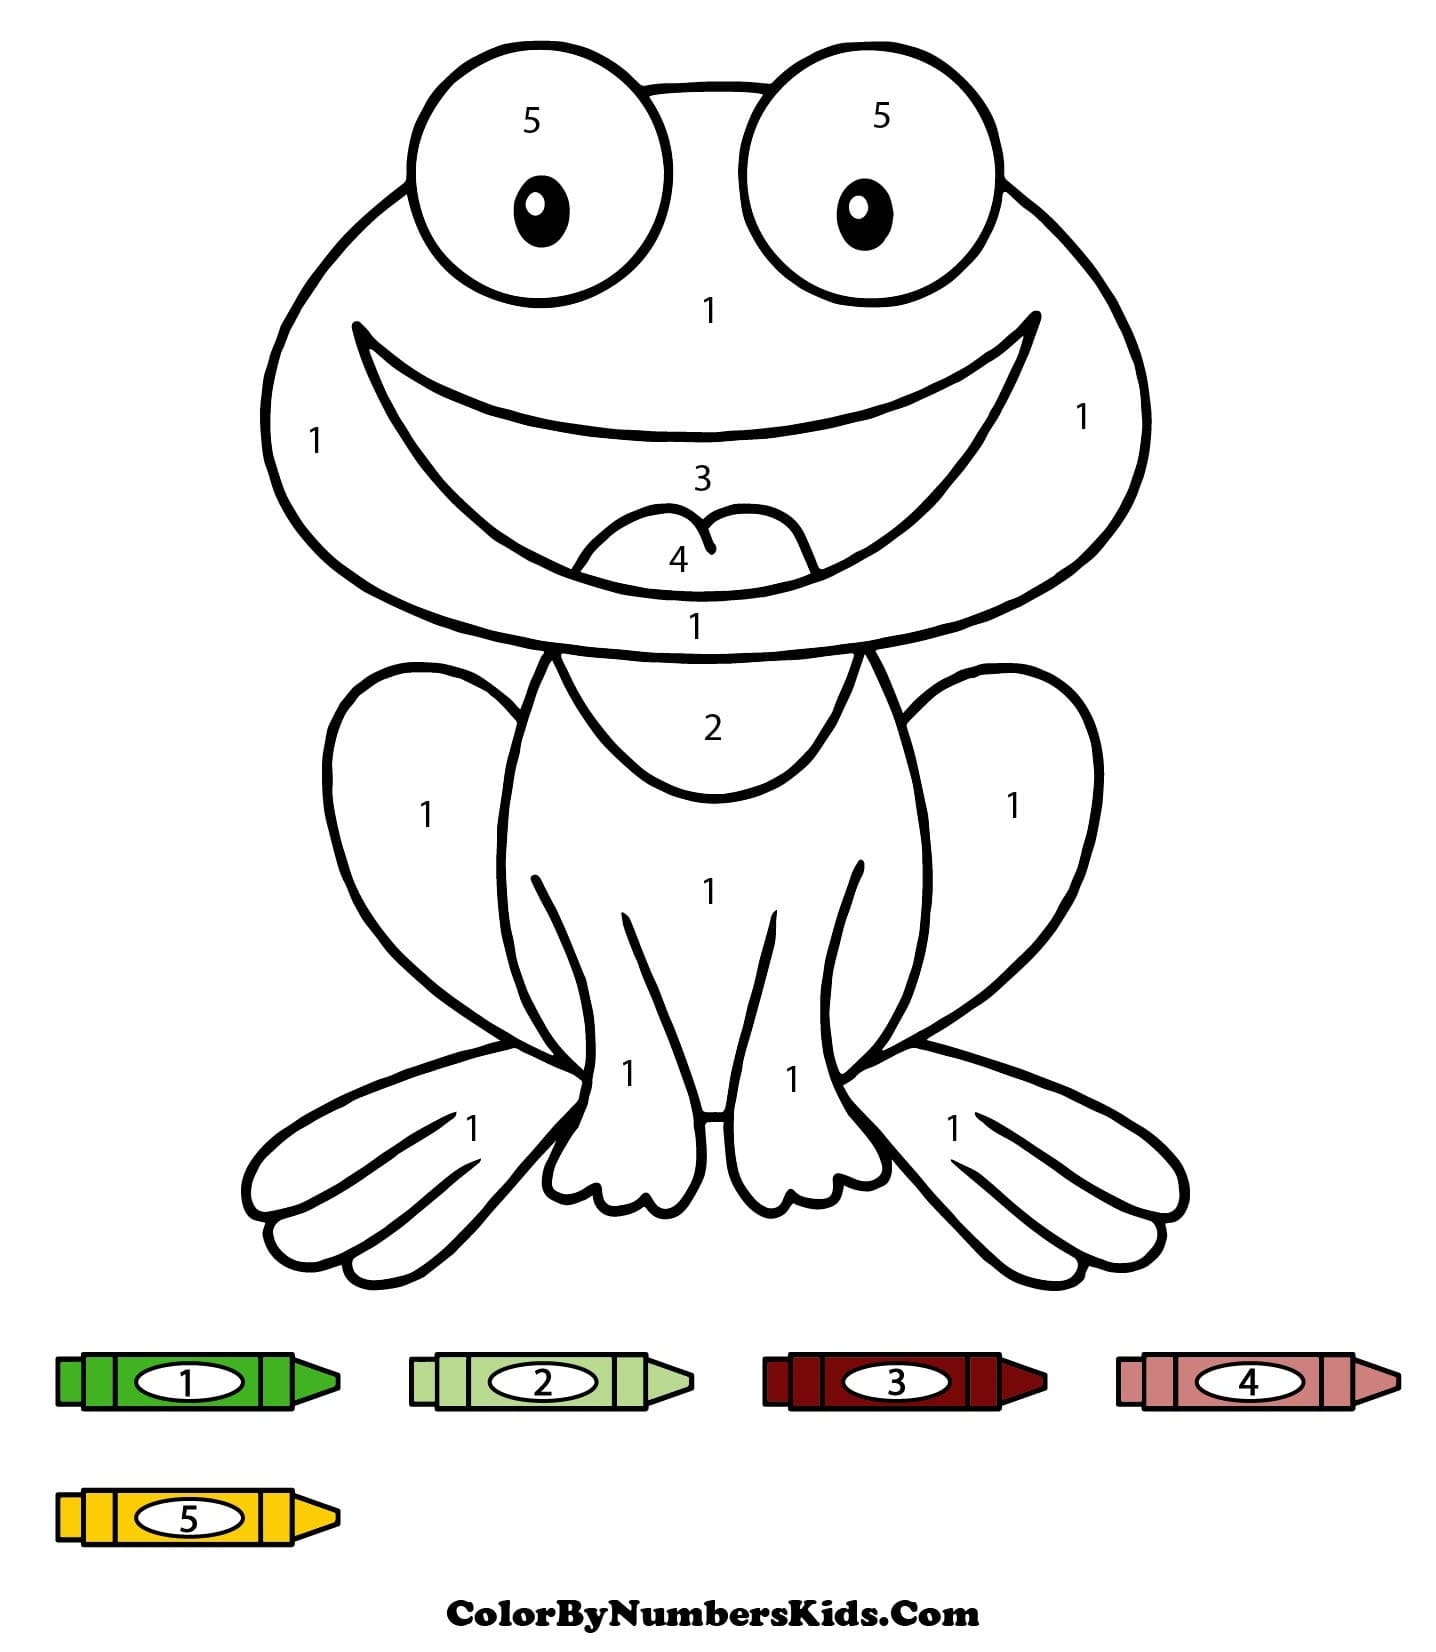 Happy Frog Color By Number